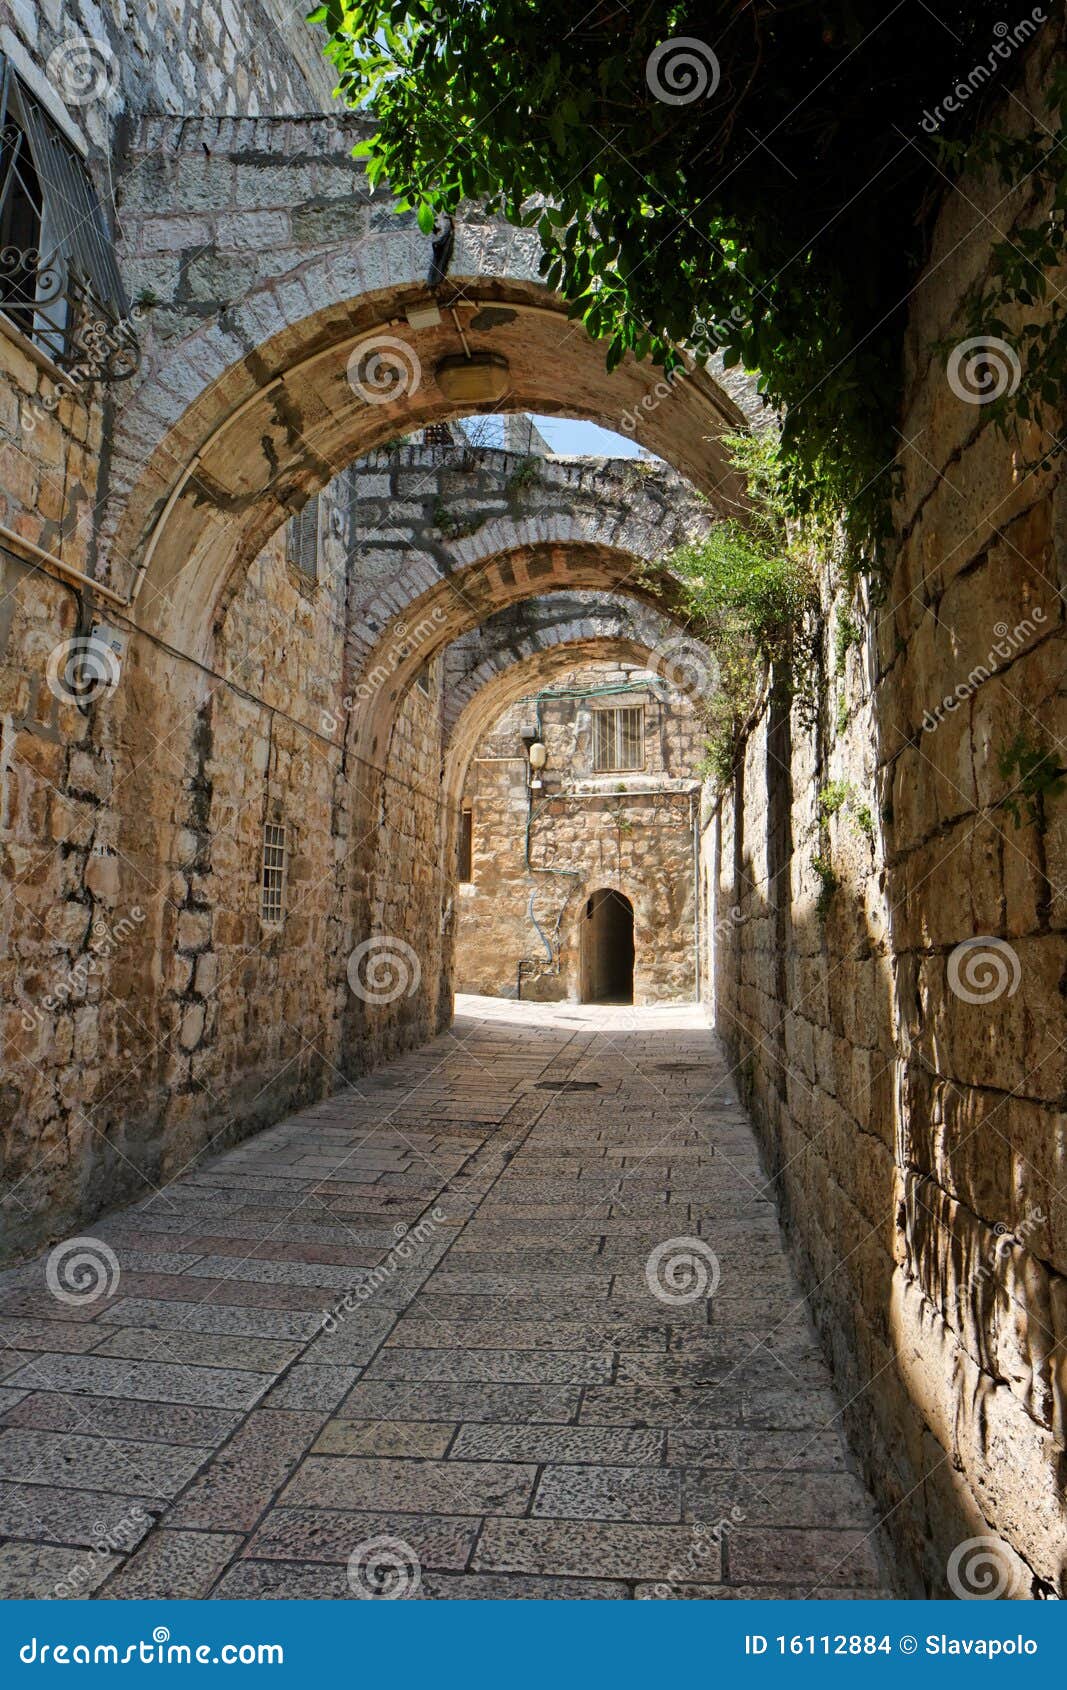 arched passage in the old city of jerusalem